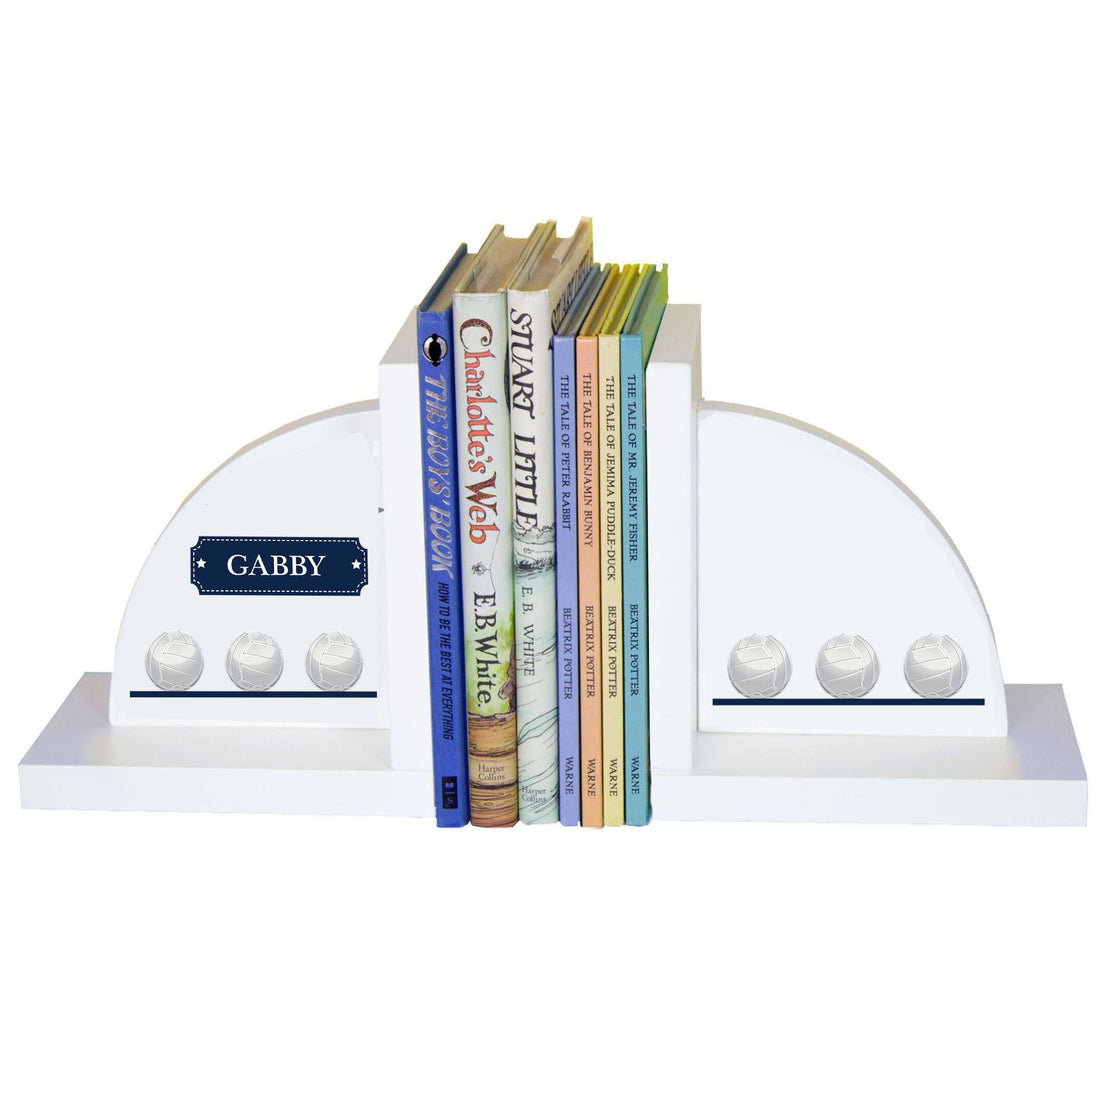 Personalized White Bookends with Volley Balls design